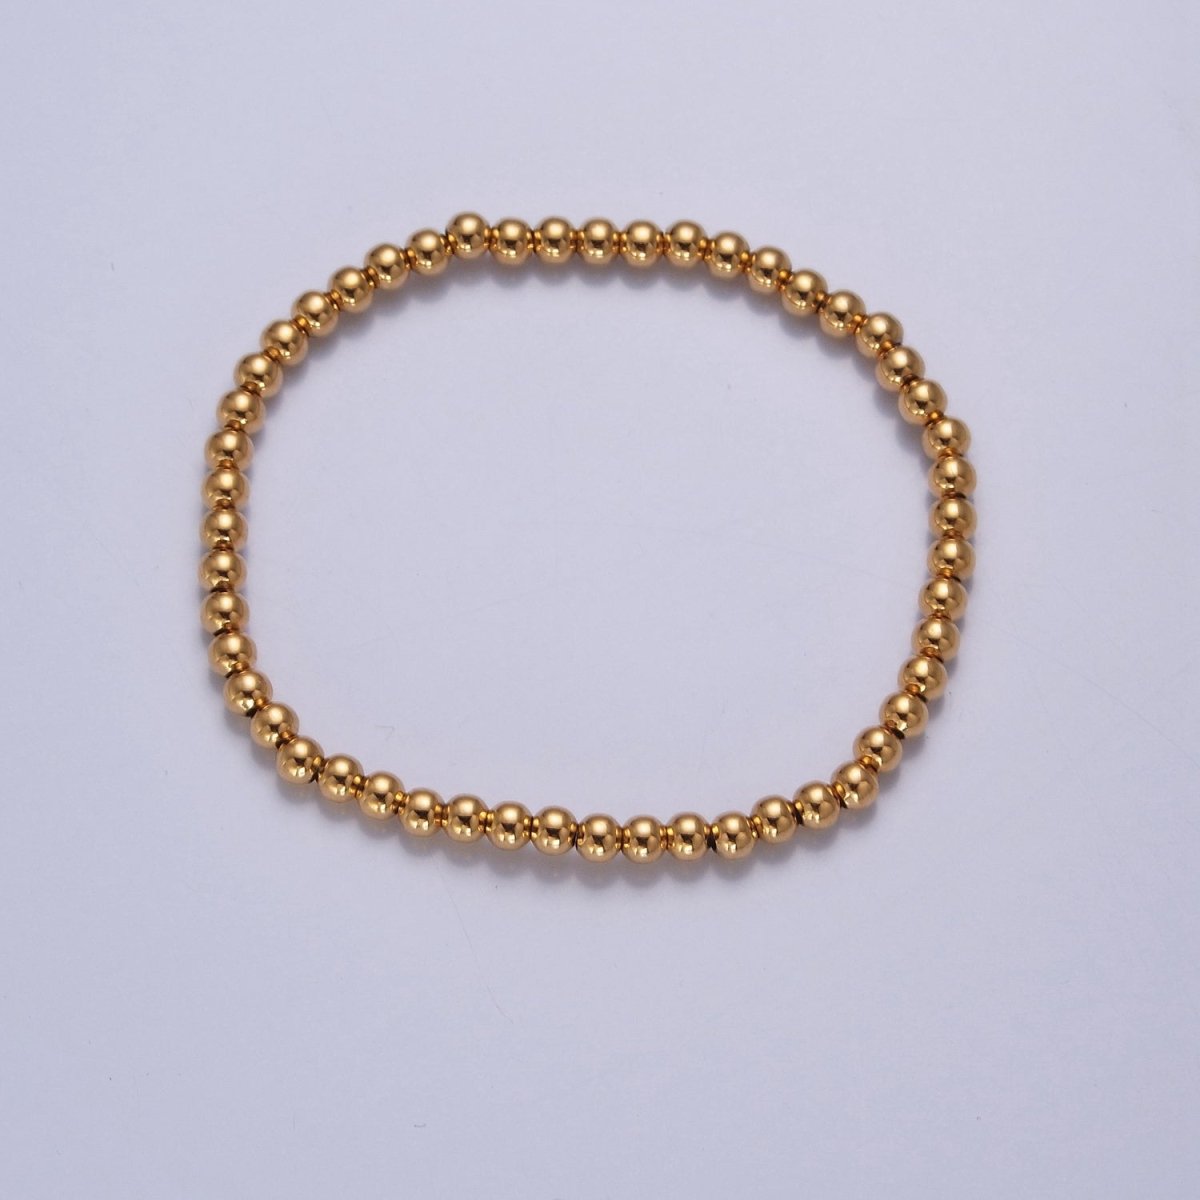 Gold Bead Bracelet for Women 18K Gold Filled Bead Ball Bracelet Stretchable Elastic Bracelet | WA-1066 to WA-1071 Clearance Pricing - DLUXCA